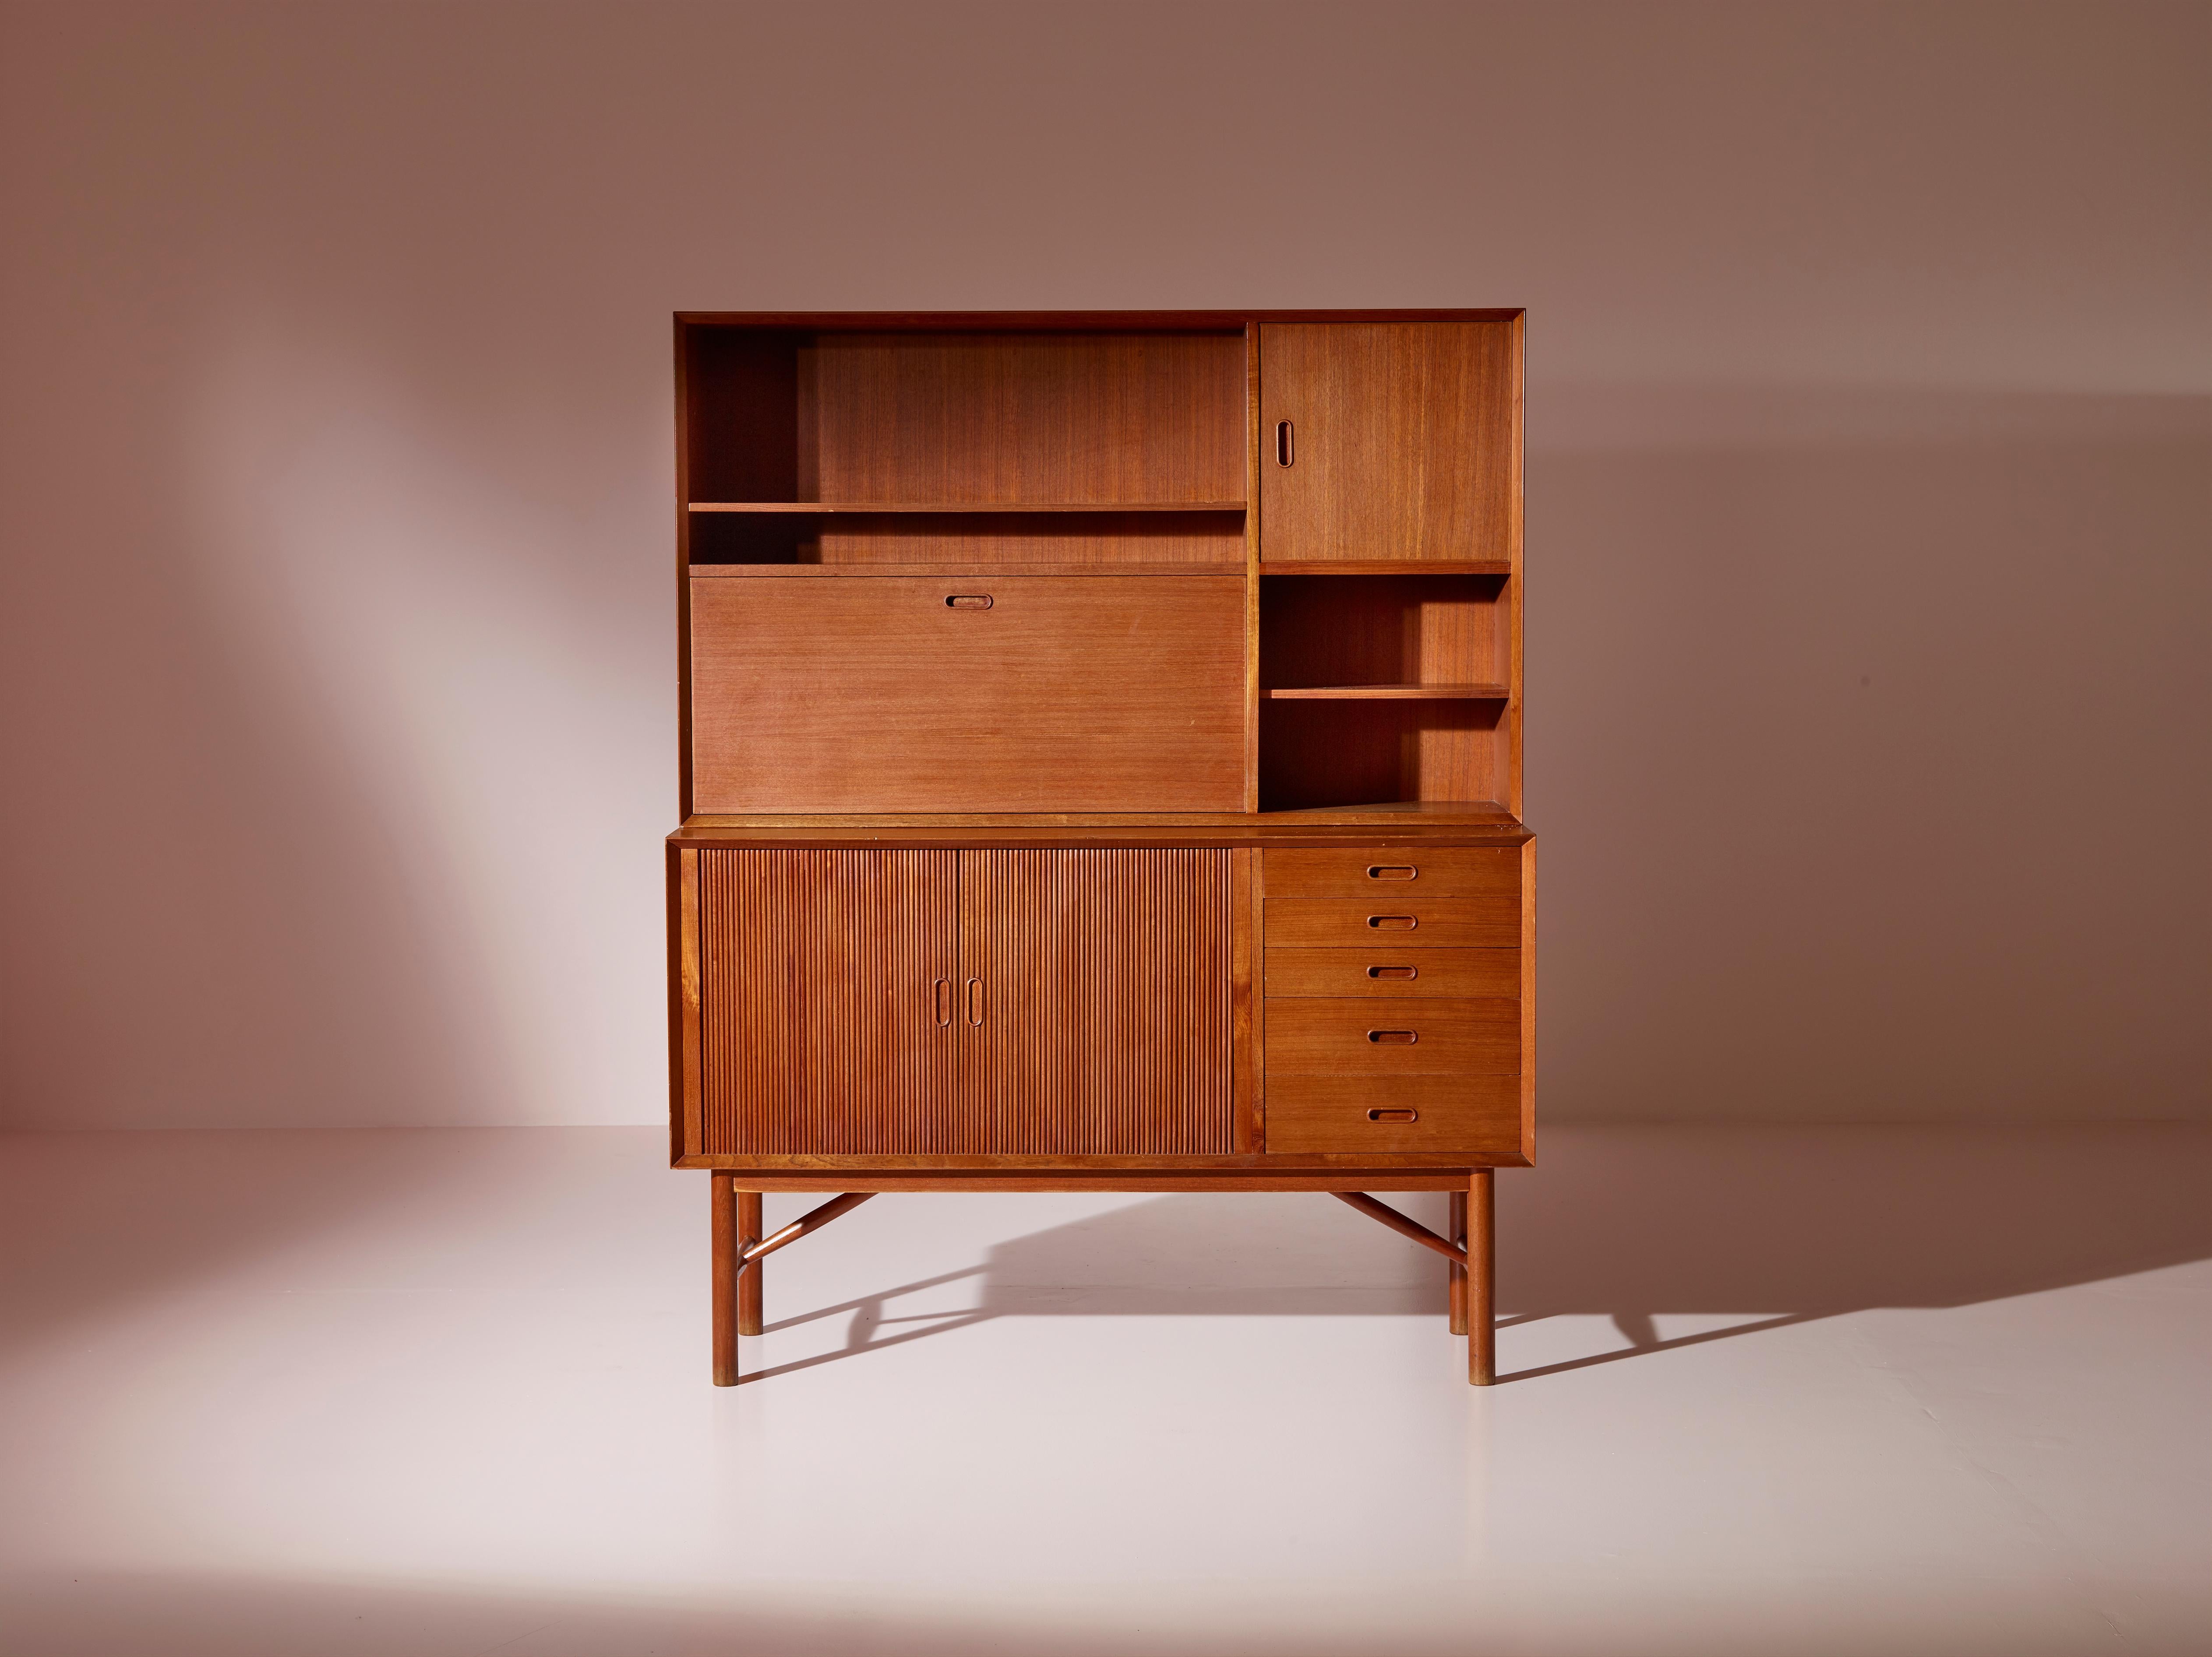 Crafted by Søborg Møbelfabrik in Denmark during the 1950s, this modular set by Peter Hvidt & Orla Mølgaard Nielsen is made from solid teak wood.

The set includes the exquisite sideboard Model 309C, accompanied by an additional shelf that can be